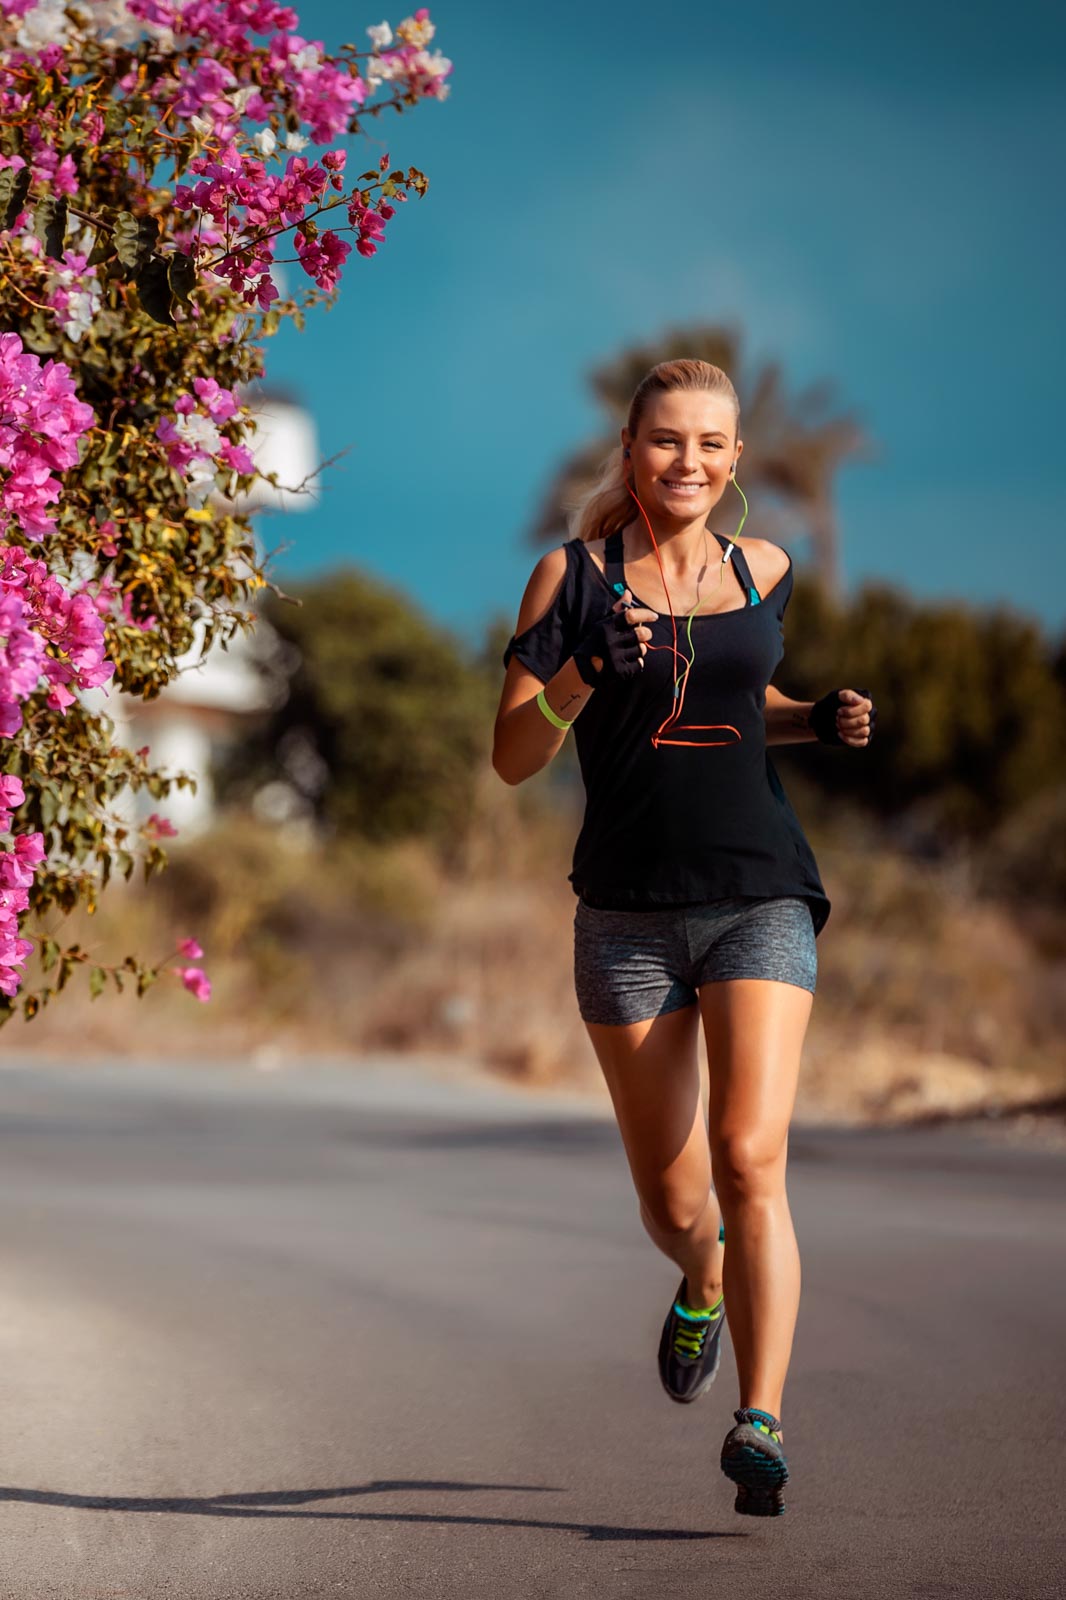 Running pain-free again in San Bernardino: California Sports and Spine Center helps patients regain active lifestyles.